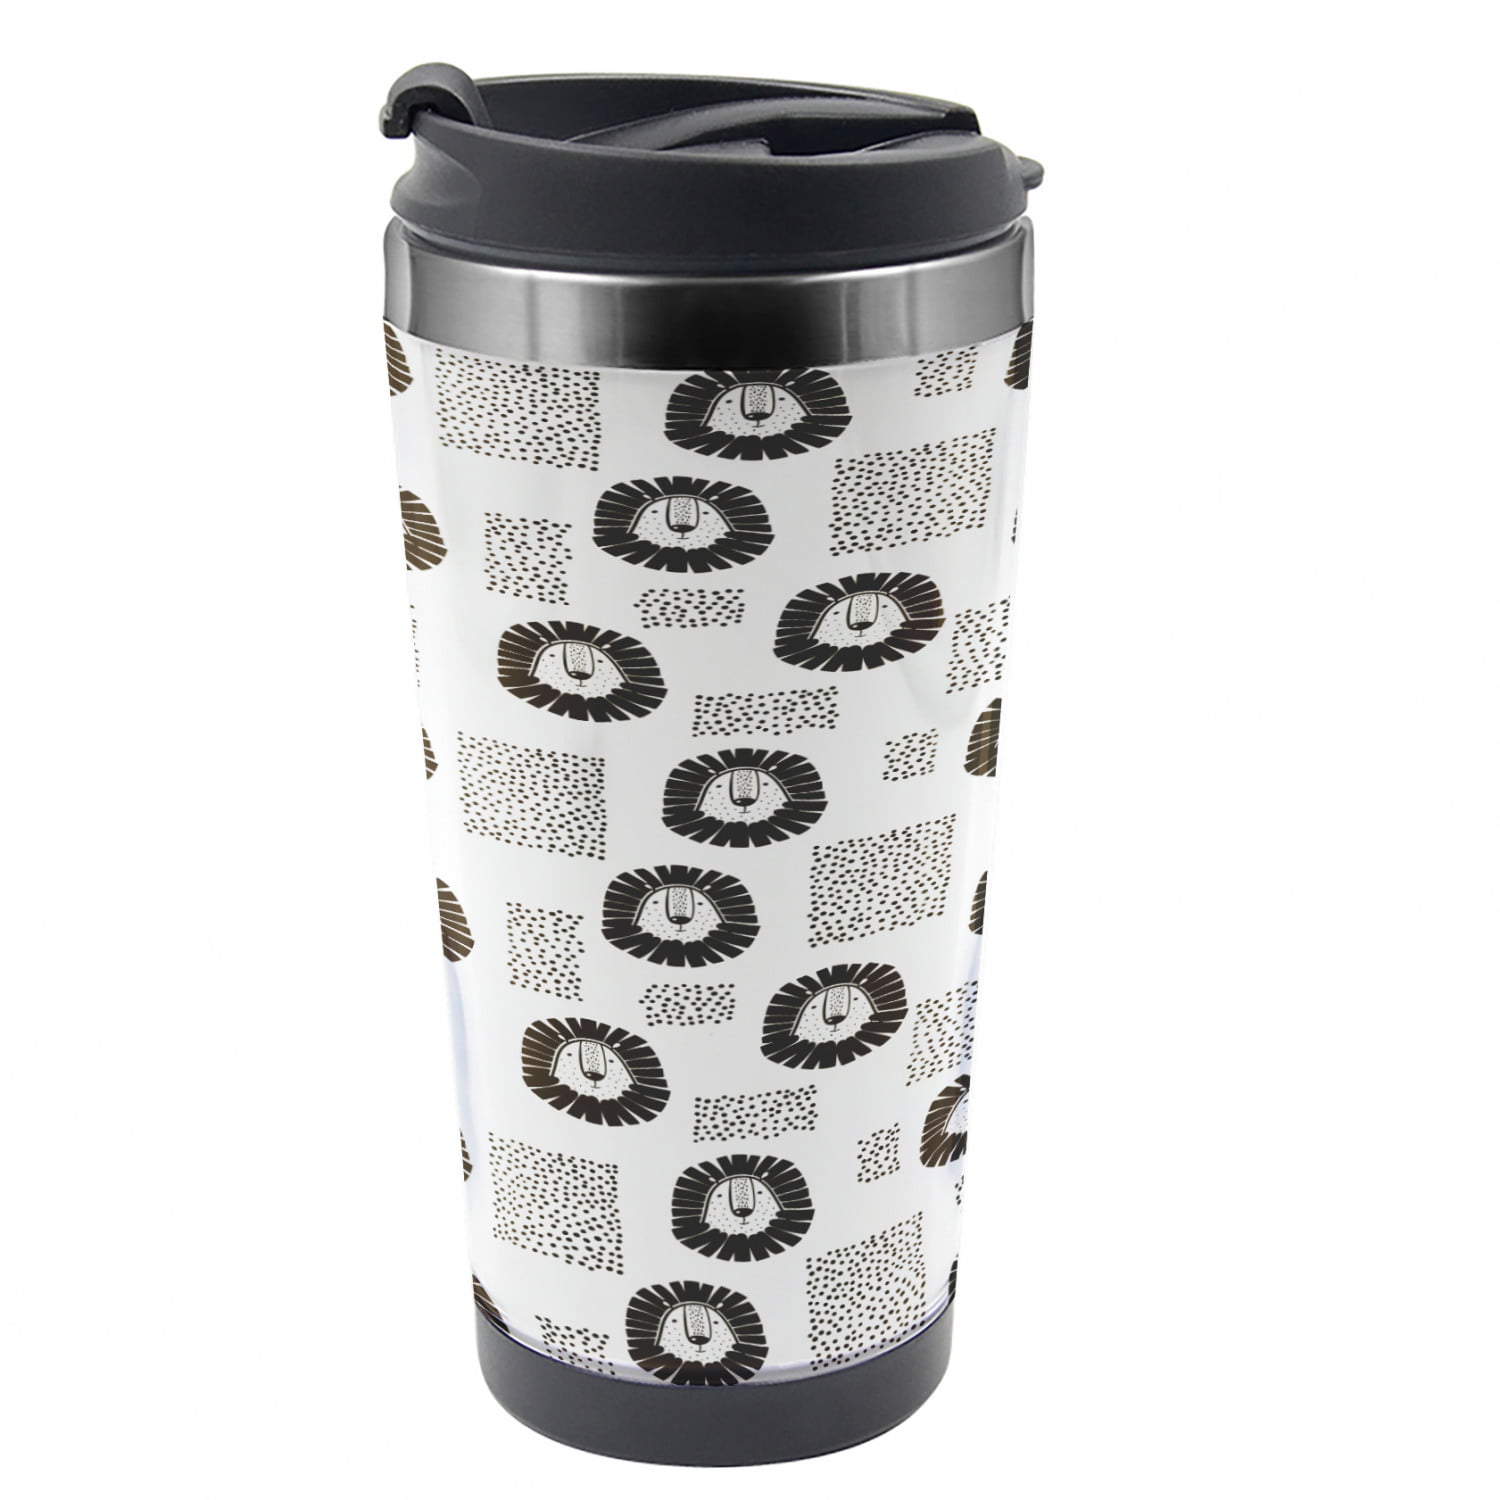 Details about   Bubba Insulated Thermos Travel Mug Hot Cold Coffee Tea 18oz Tumbler Cup Black 